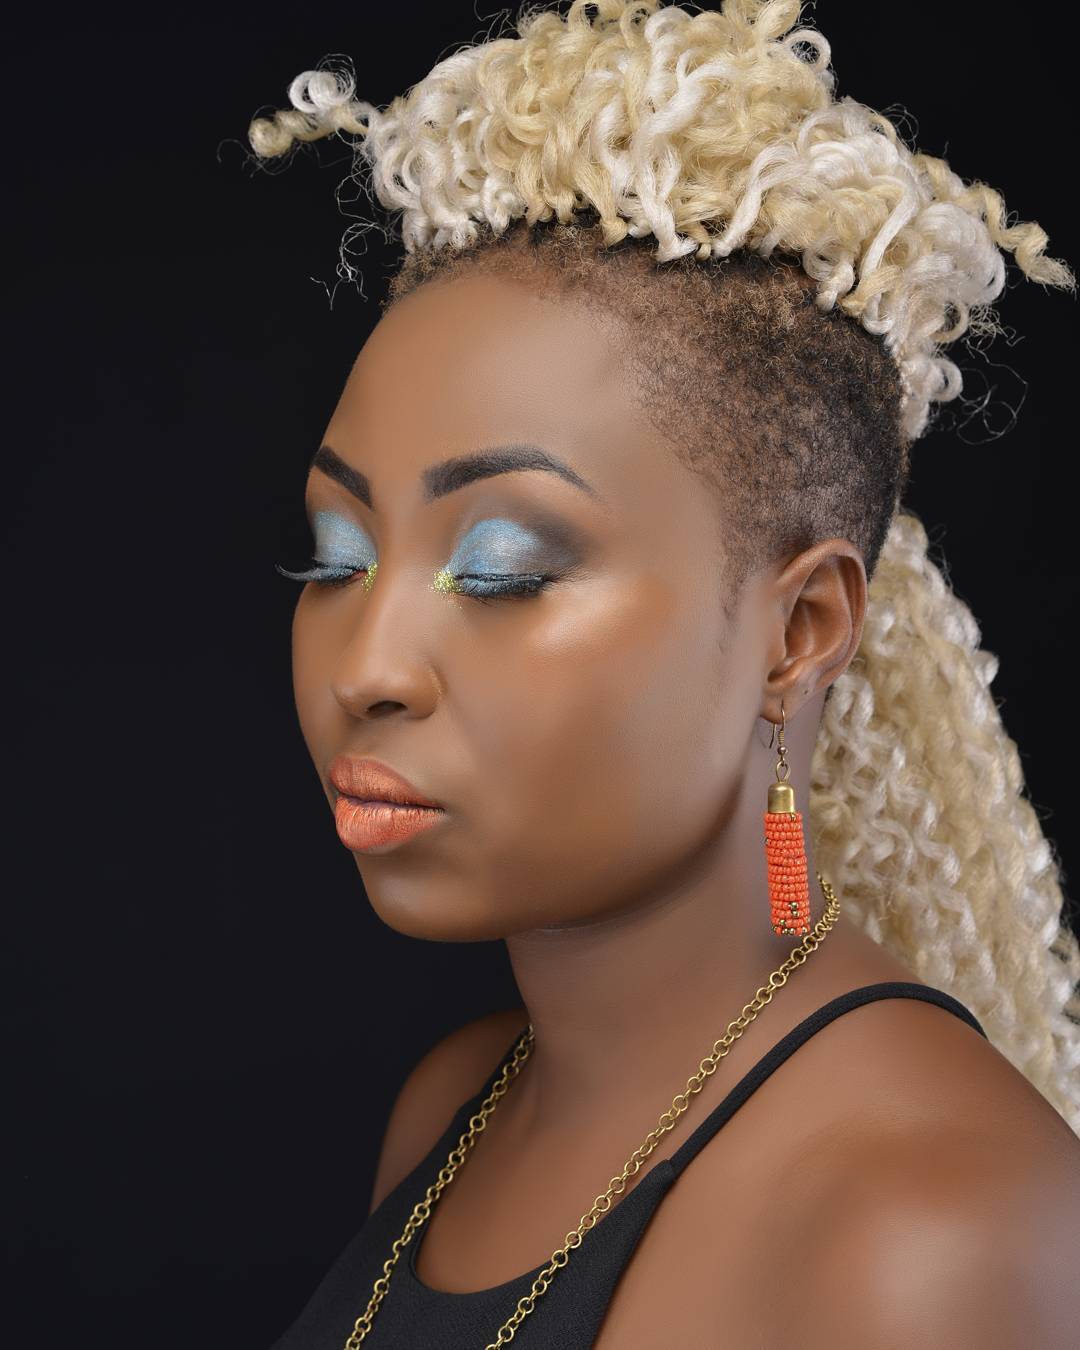 “I have worked hard to build my career!” Vivianne tells off those claiming her music is lacking